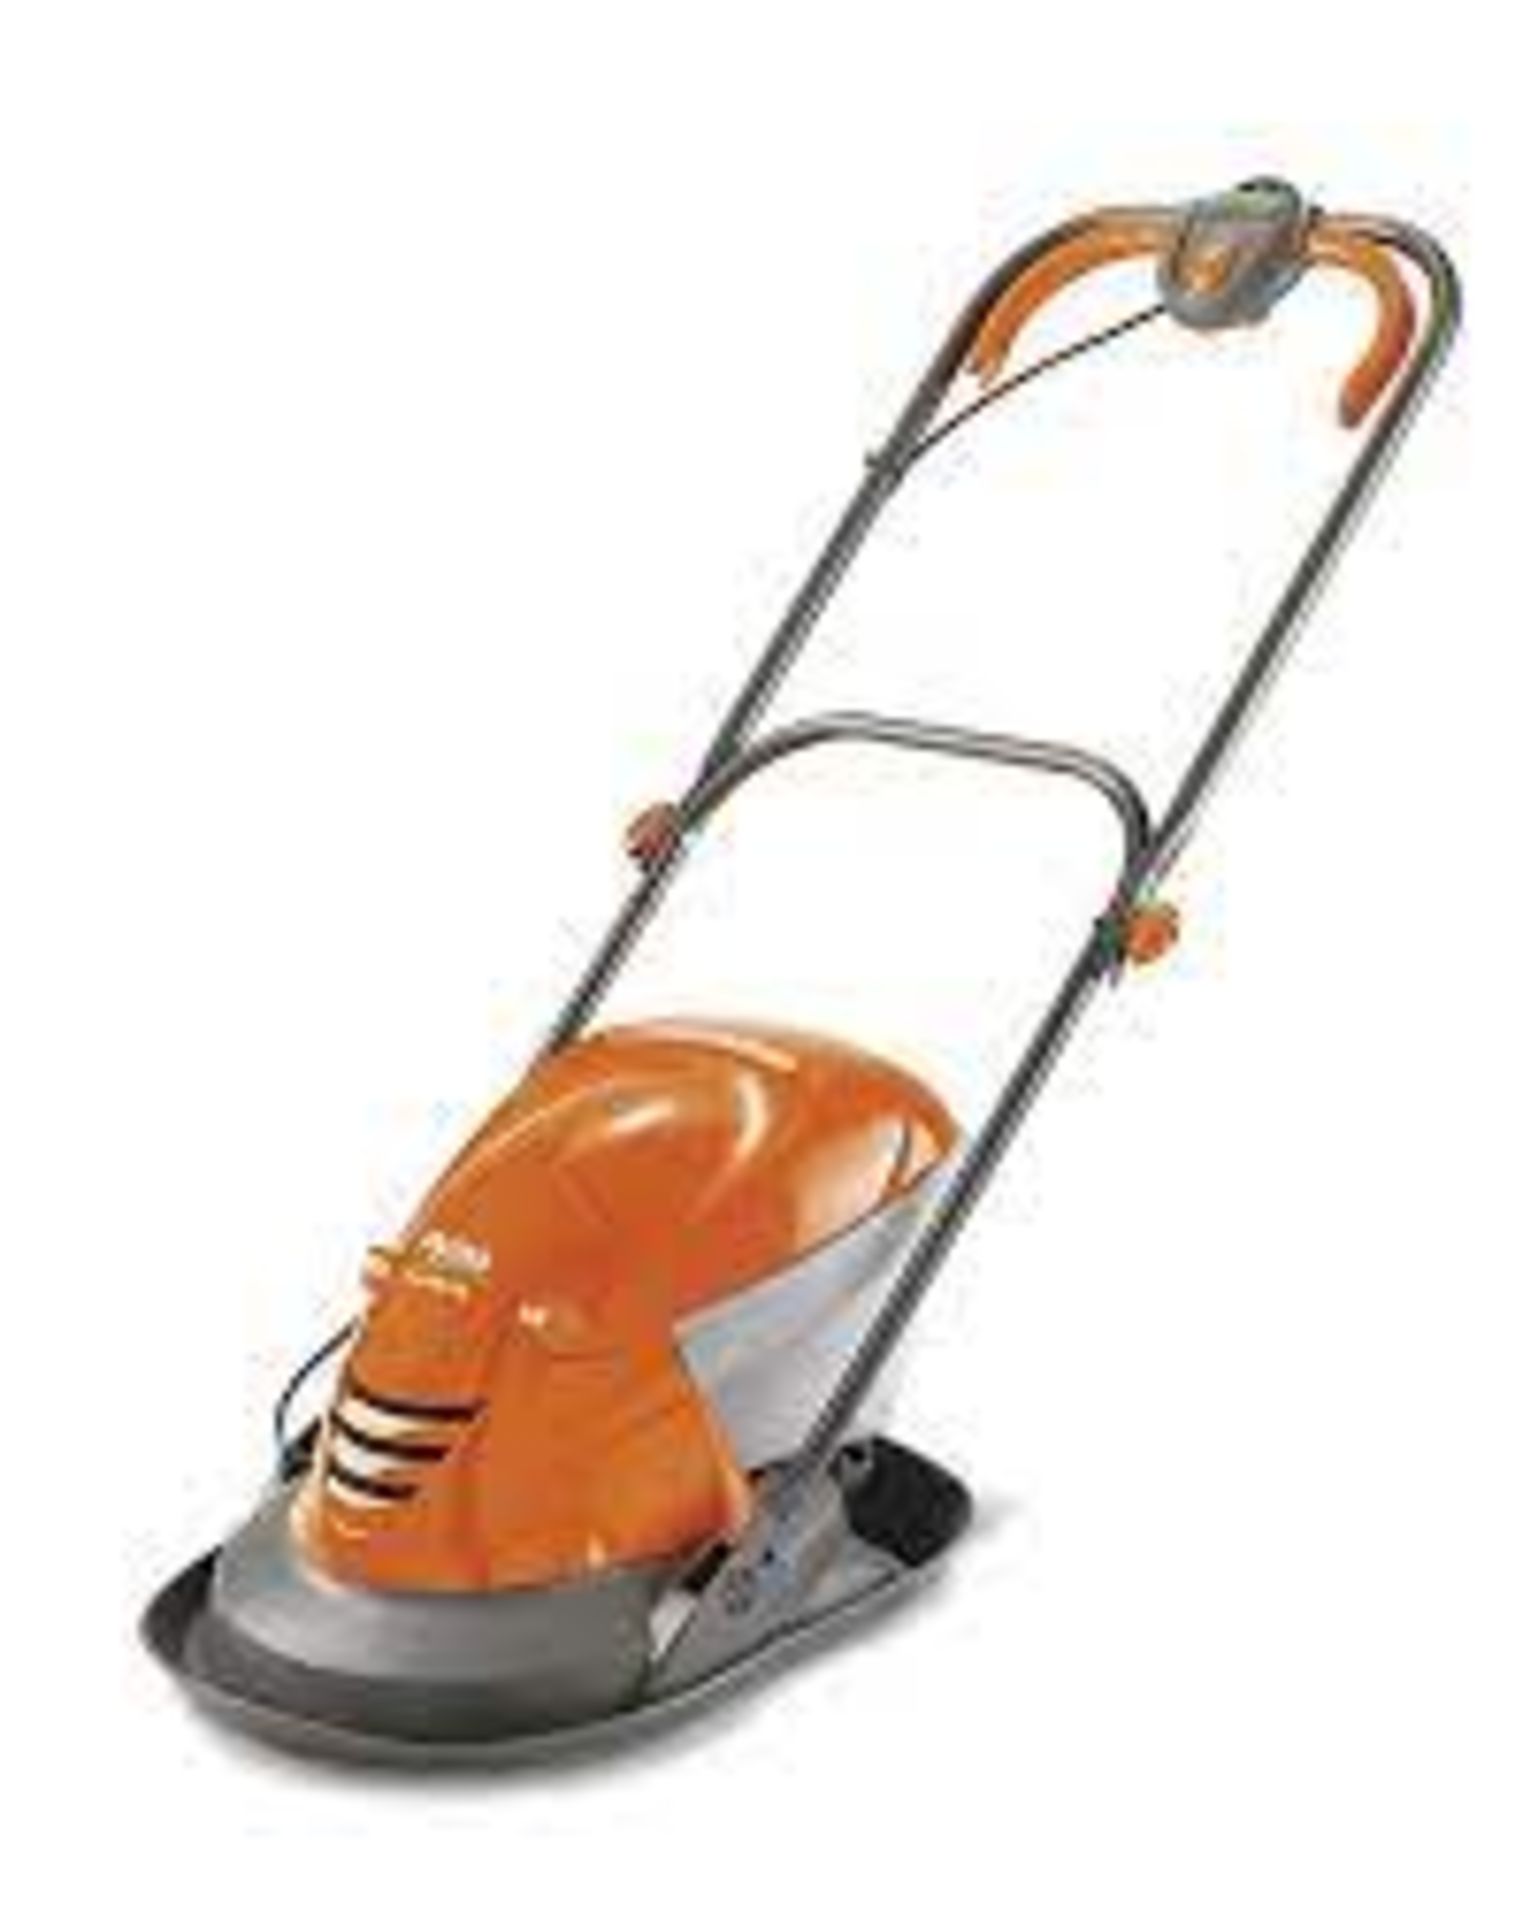 Flymo Hover Vac 270 Corded Hover Lawnmower - SR5